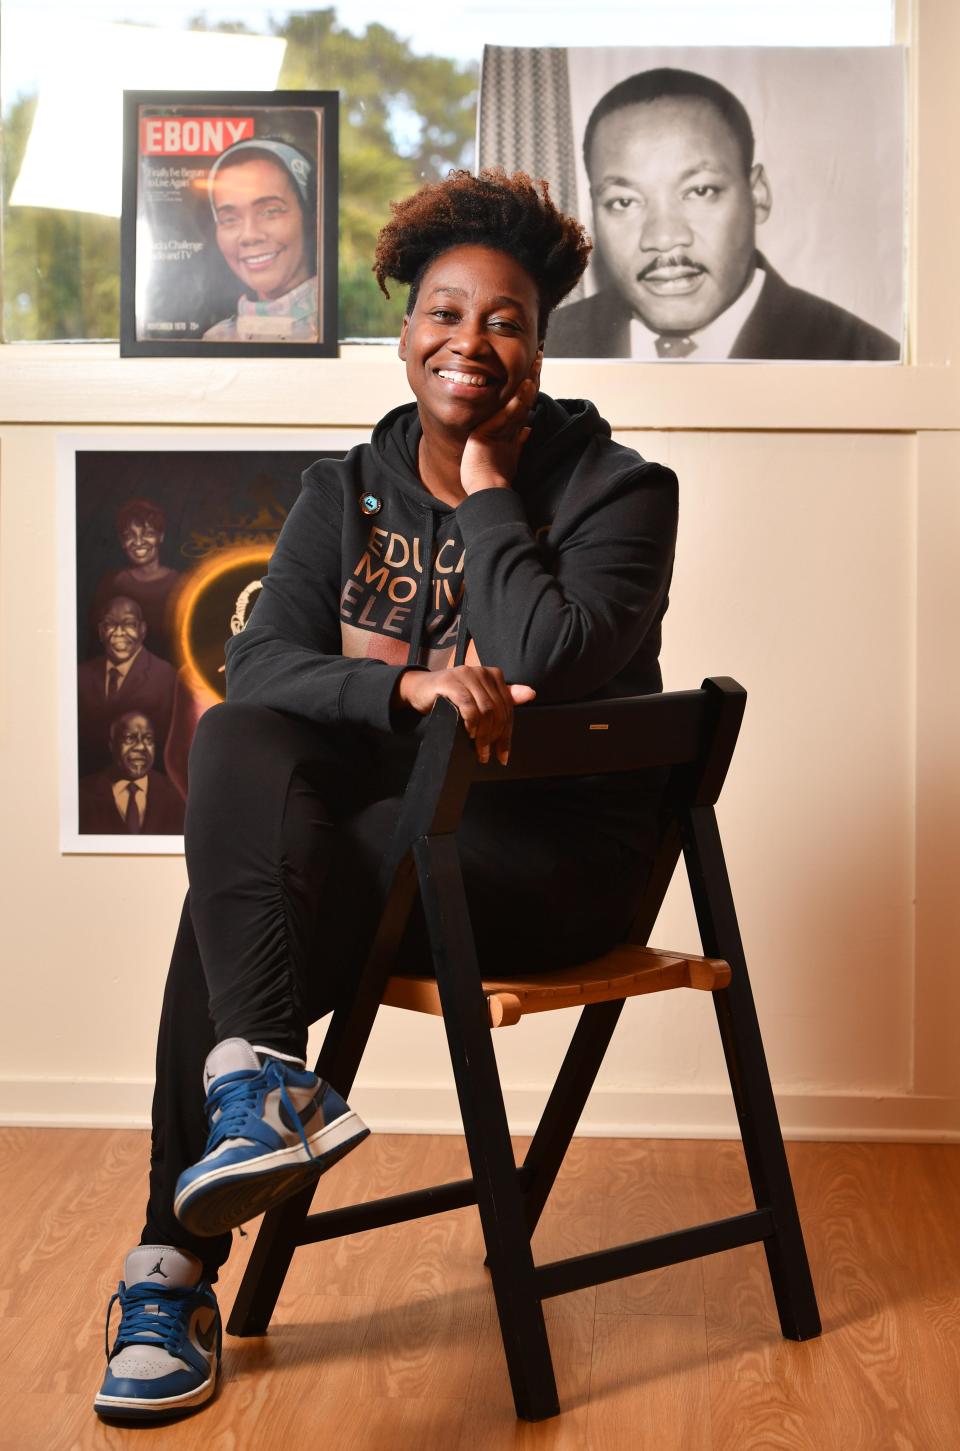 Neirda Thompson-Pemberton is executive director of FUNducation and an advocate for S.T.E.A.M (Science, Technology, Engineering, Arts, Mathematics) in education. Photographed in the Leonard Reid House in Sarasota.